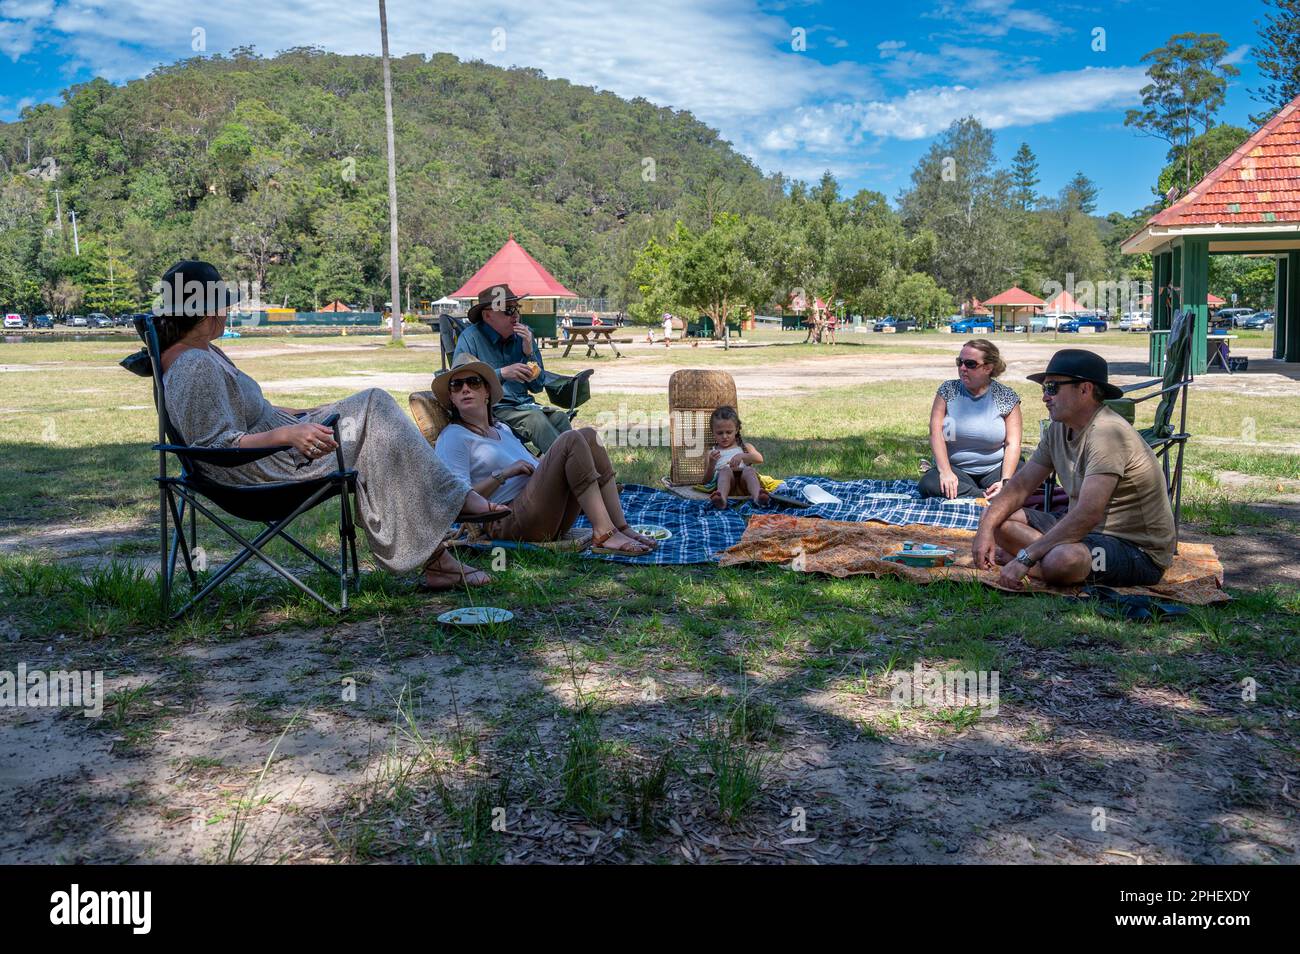 A family picnic under the shade of a tree at Bobbin Head, Kuring-Gai Chase National Park on the Hawkesbury River, Sydney, New South Wales, Australia a Stock Photo